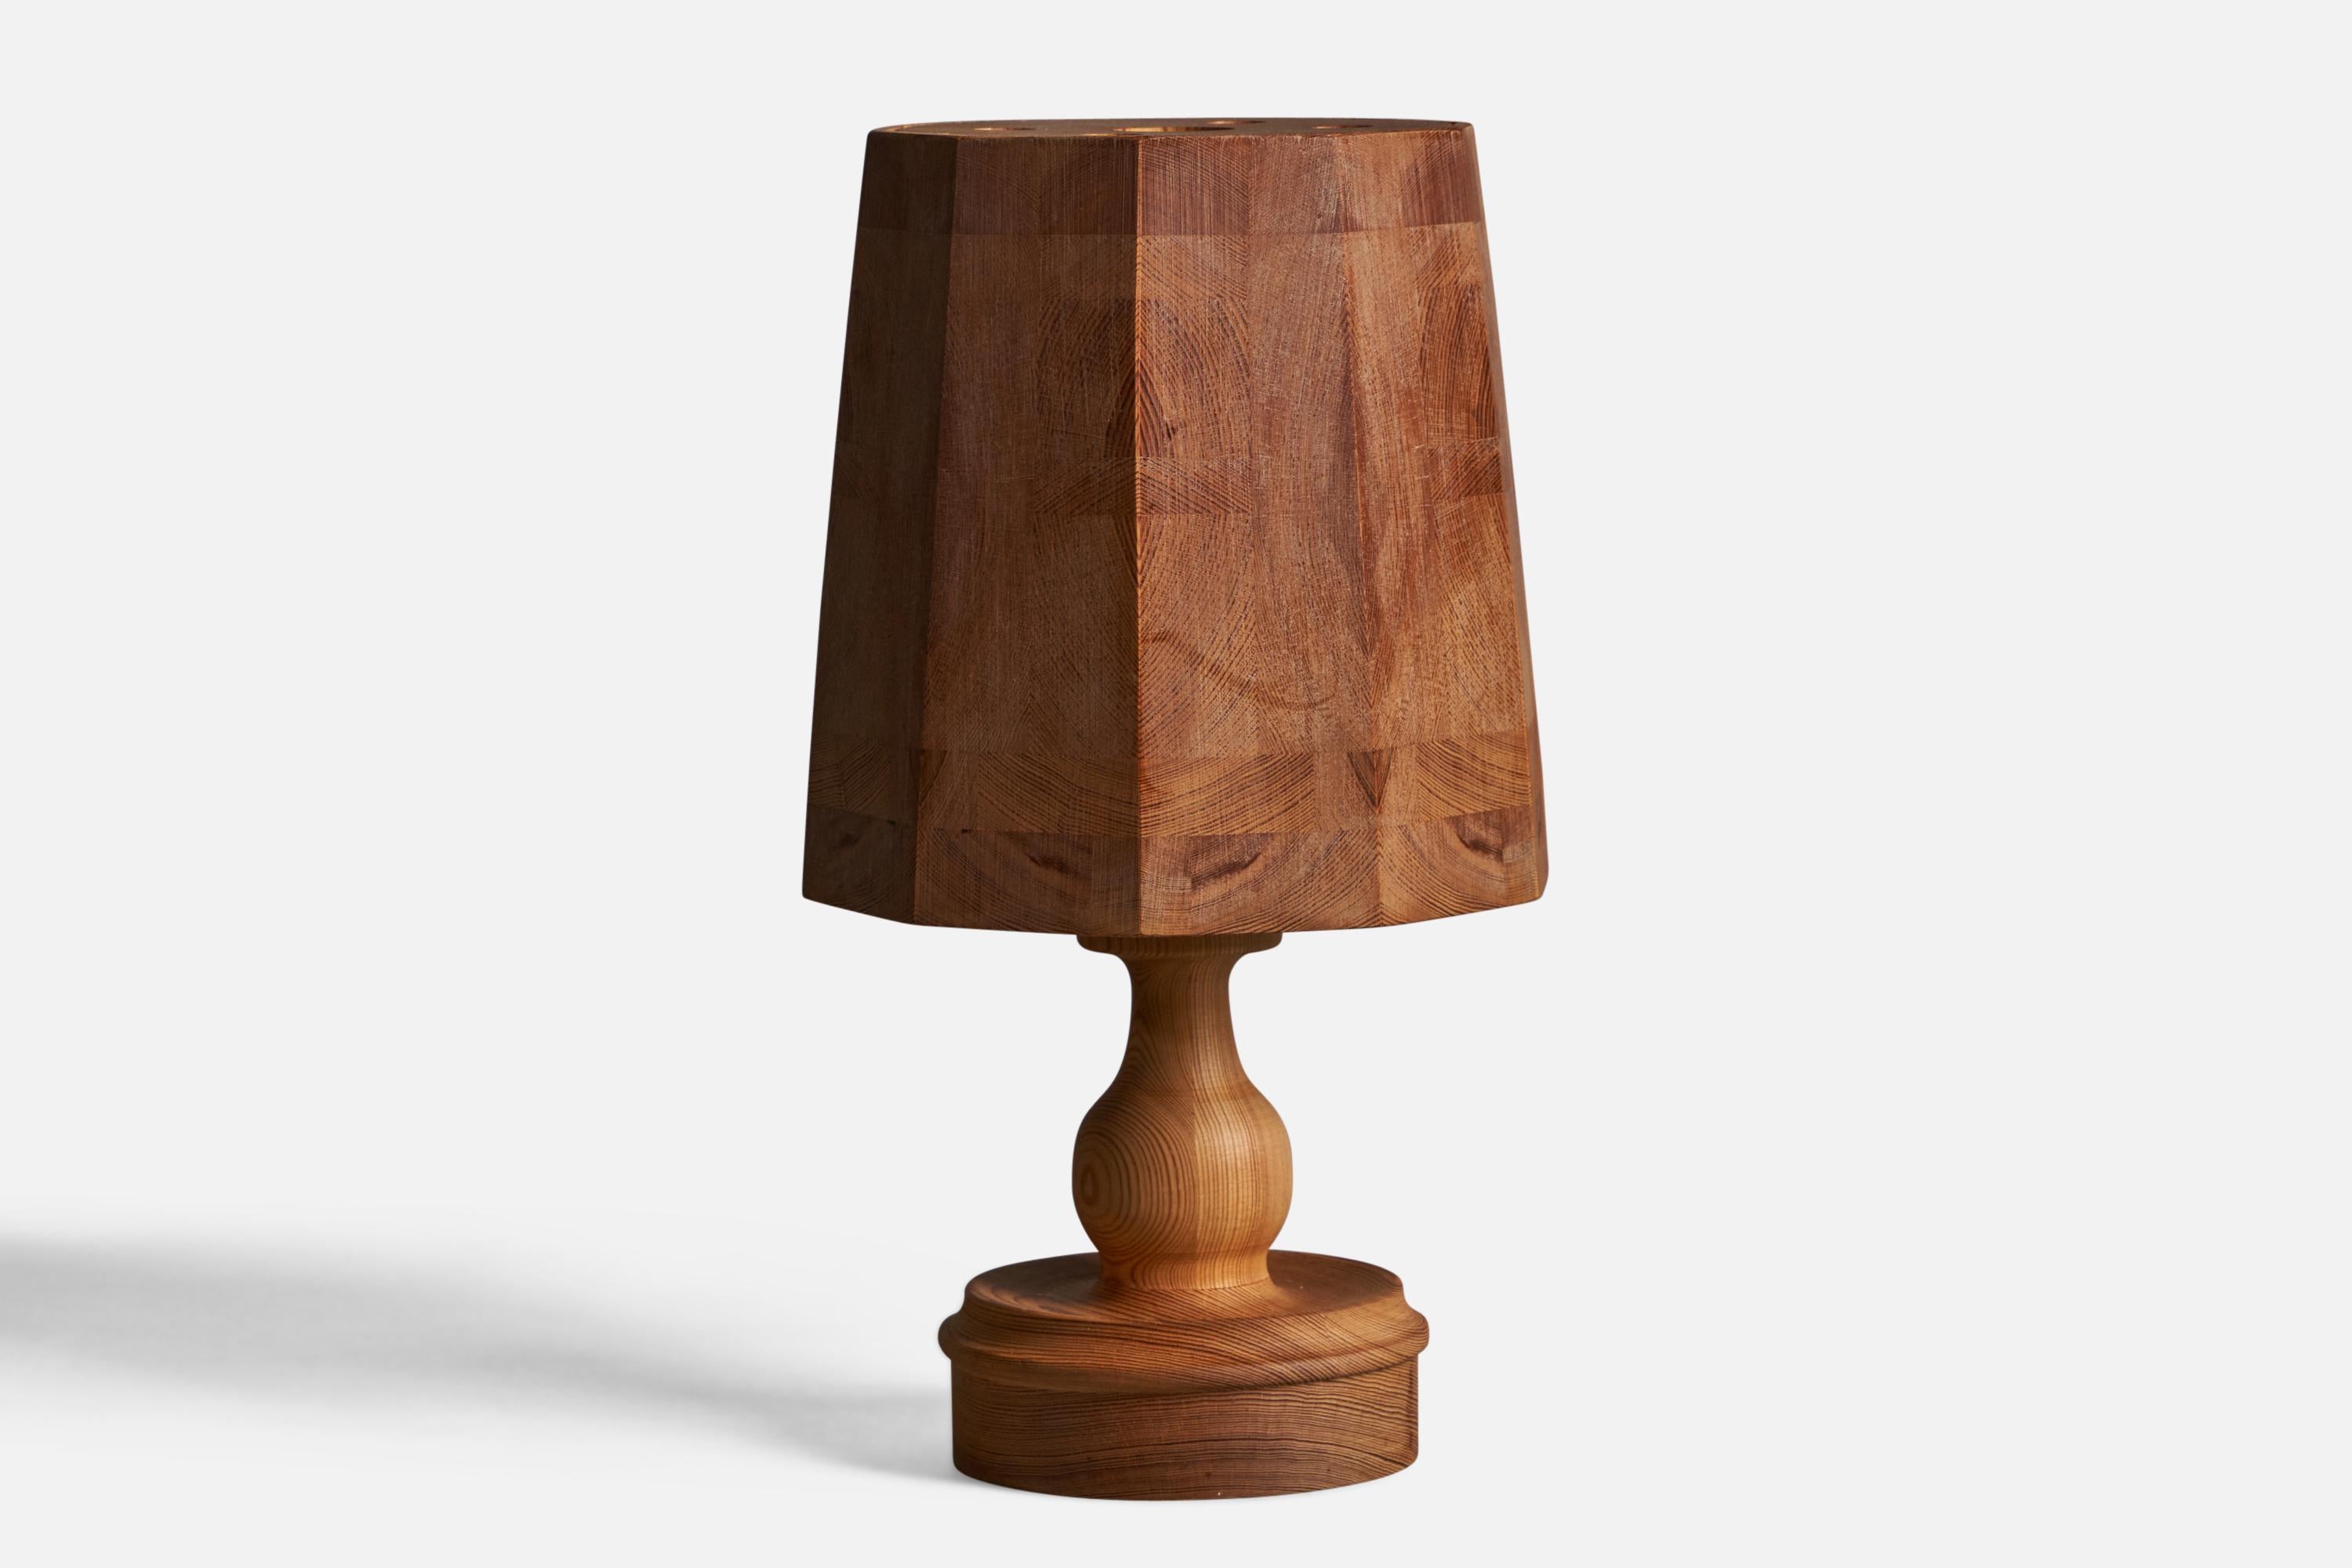 A pine table lamp, designed and produced in Sweden, 1970s.

Overall Dimensions (inches): 15.5